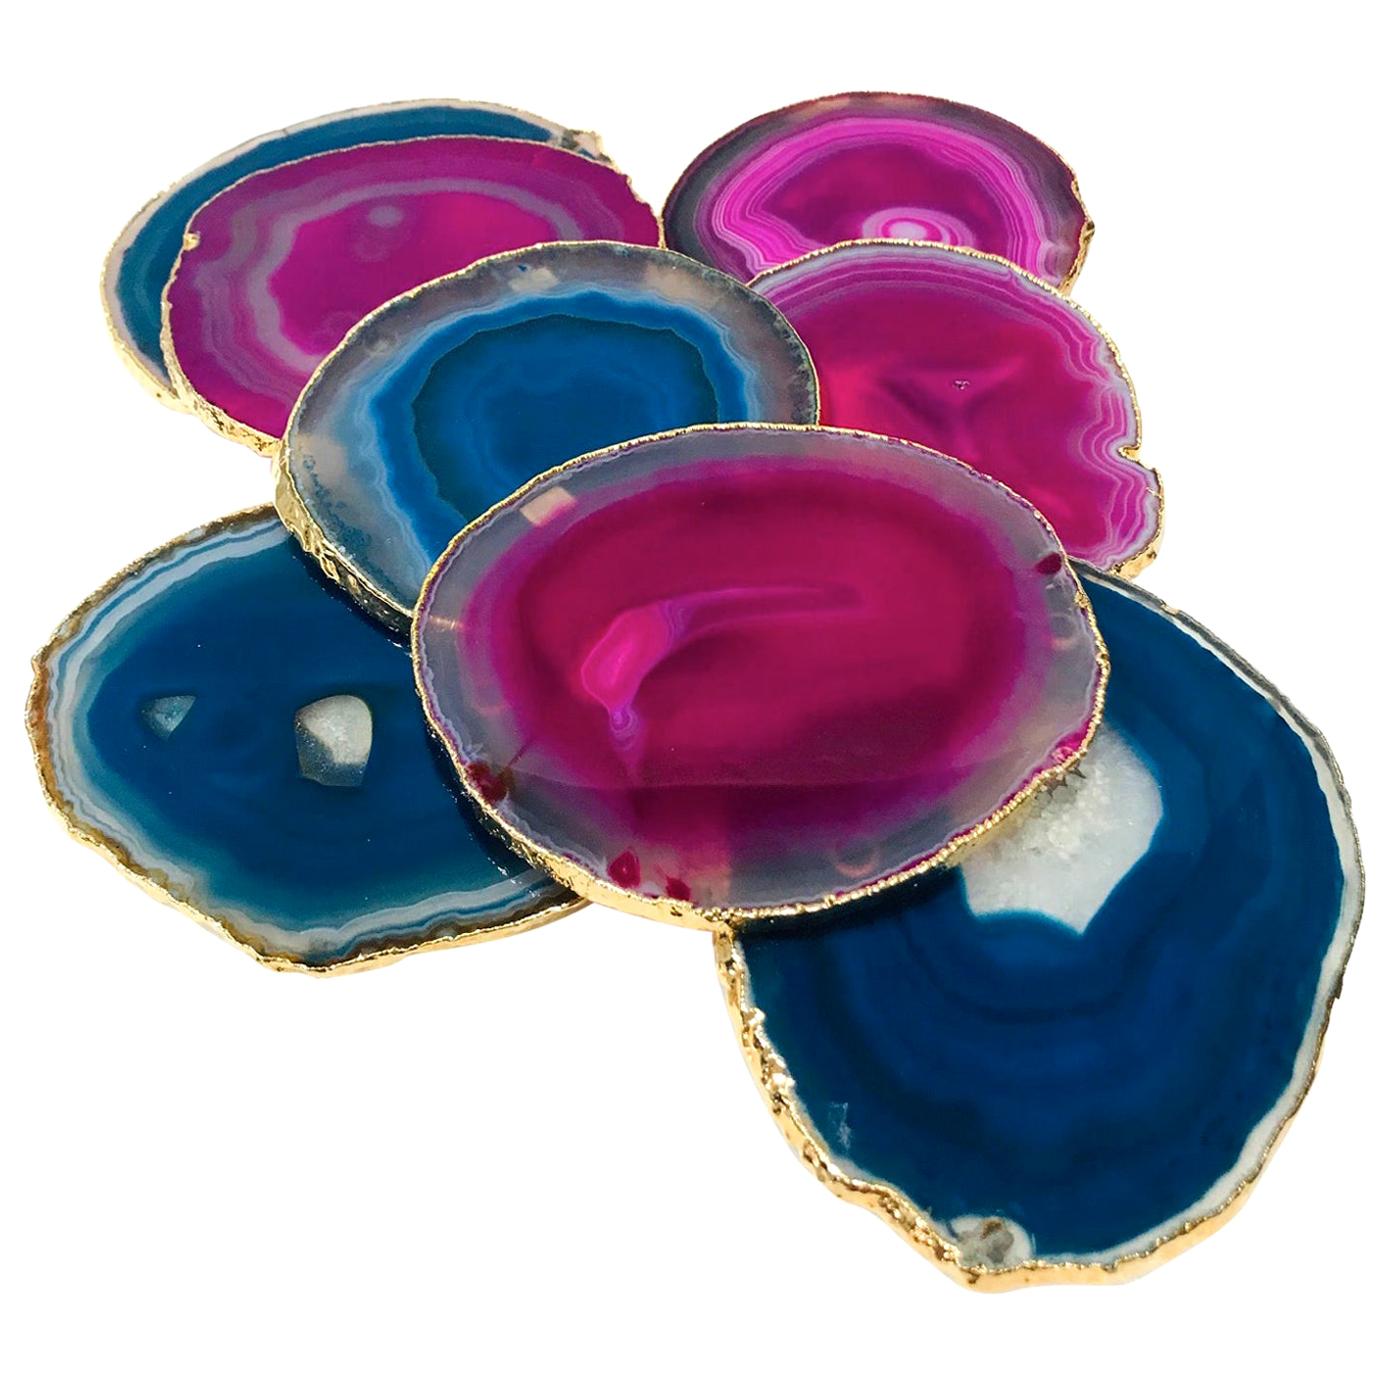 Semi-Precious Gemstone Coasters in Pink and Turquoise with 24k Gold Trim, Set /8